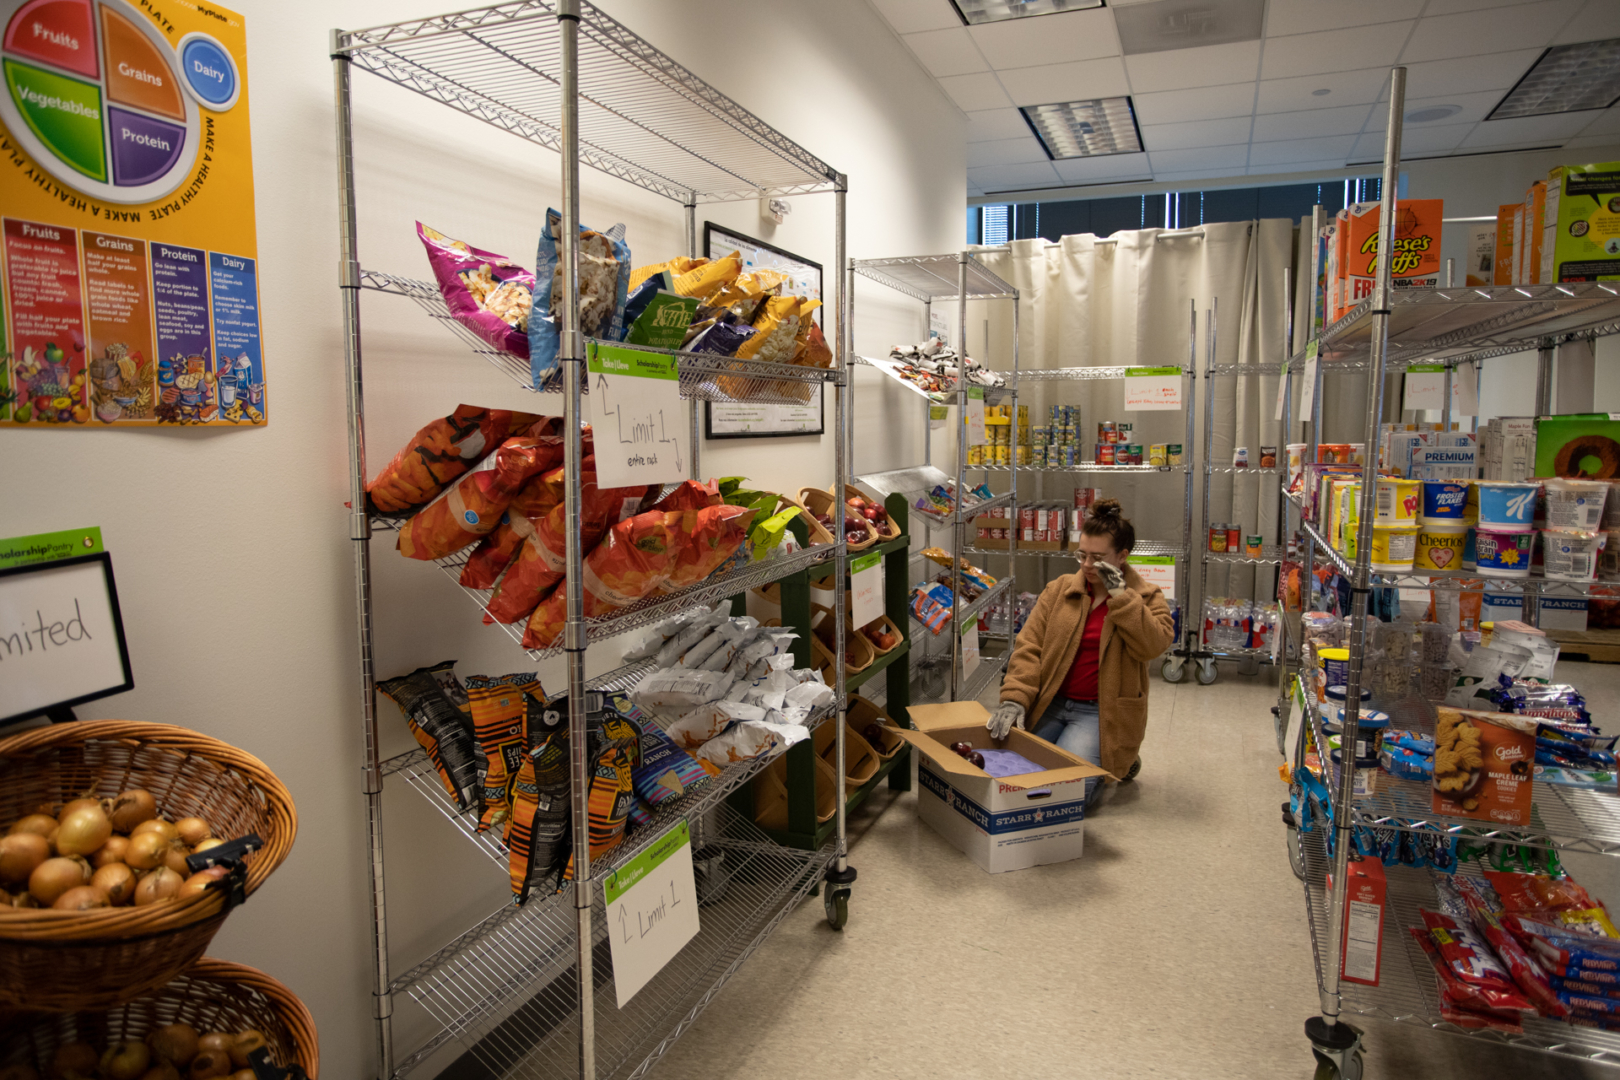 Cougar Cupboard provides perishables and non-perishables to suffice basic nutrition such as fruits, vegetables, dairy, meats, and even essential toiletry items. Students are allowed to take home up to eight pounds of fruits and vegetables, seven pounds of protein, and seven pounds of dry goods a week. 